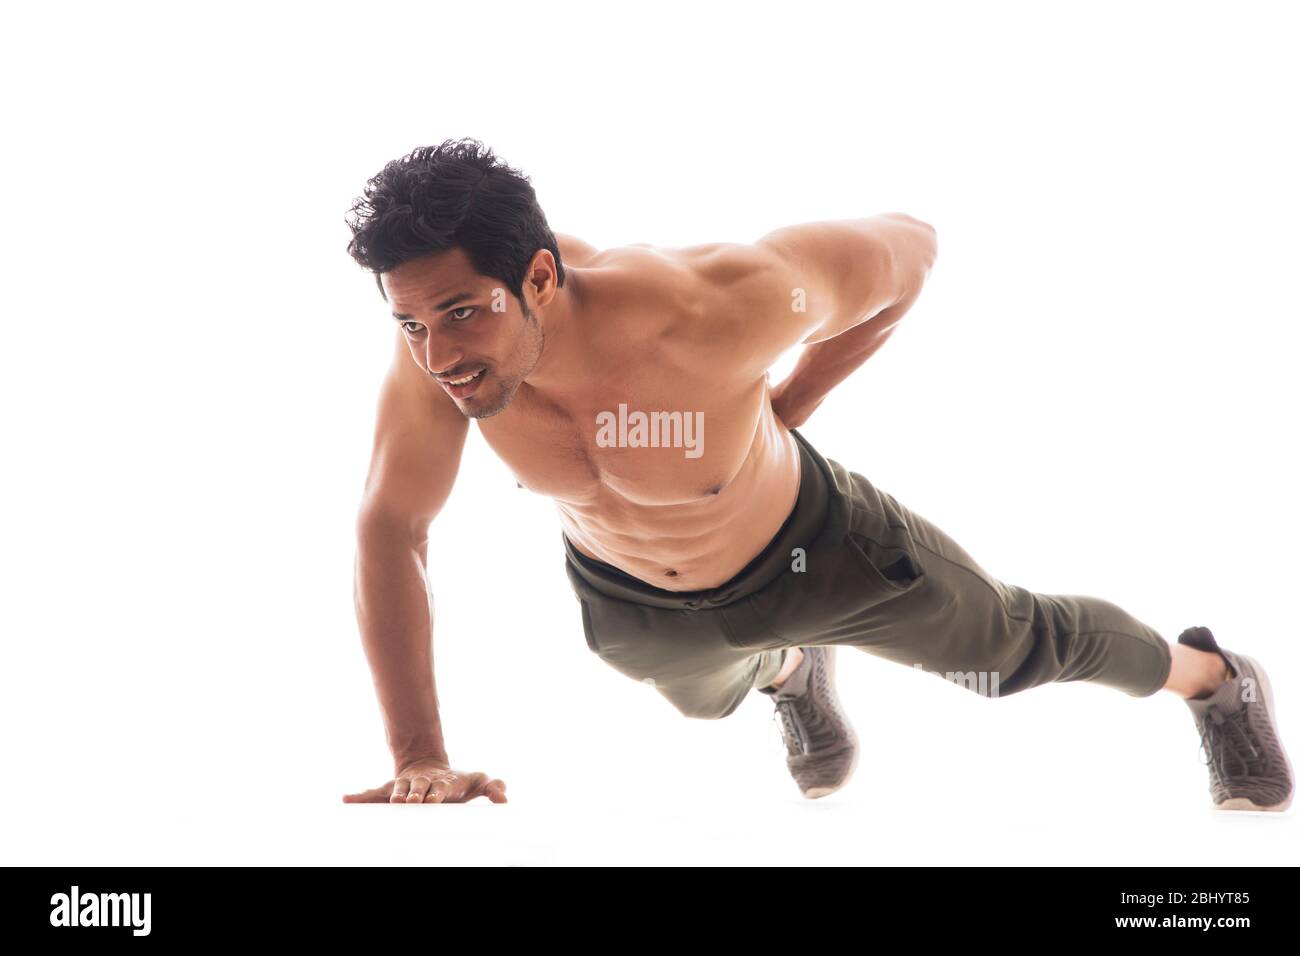 Man doing pushups with one hand in front of a white background. Stock Photo